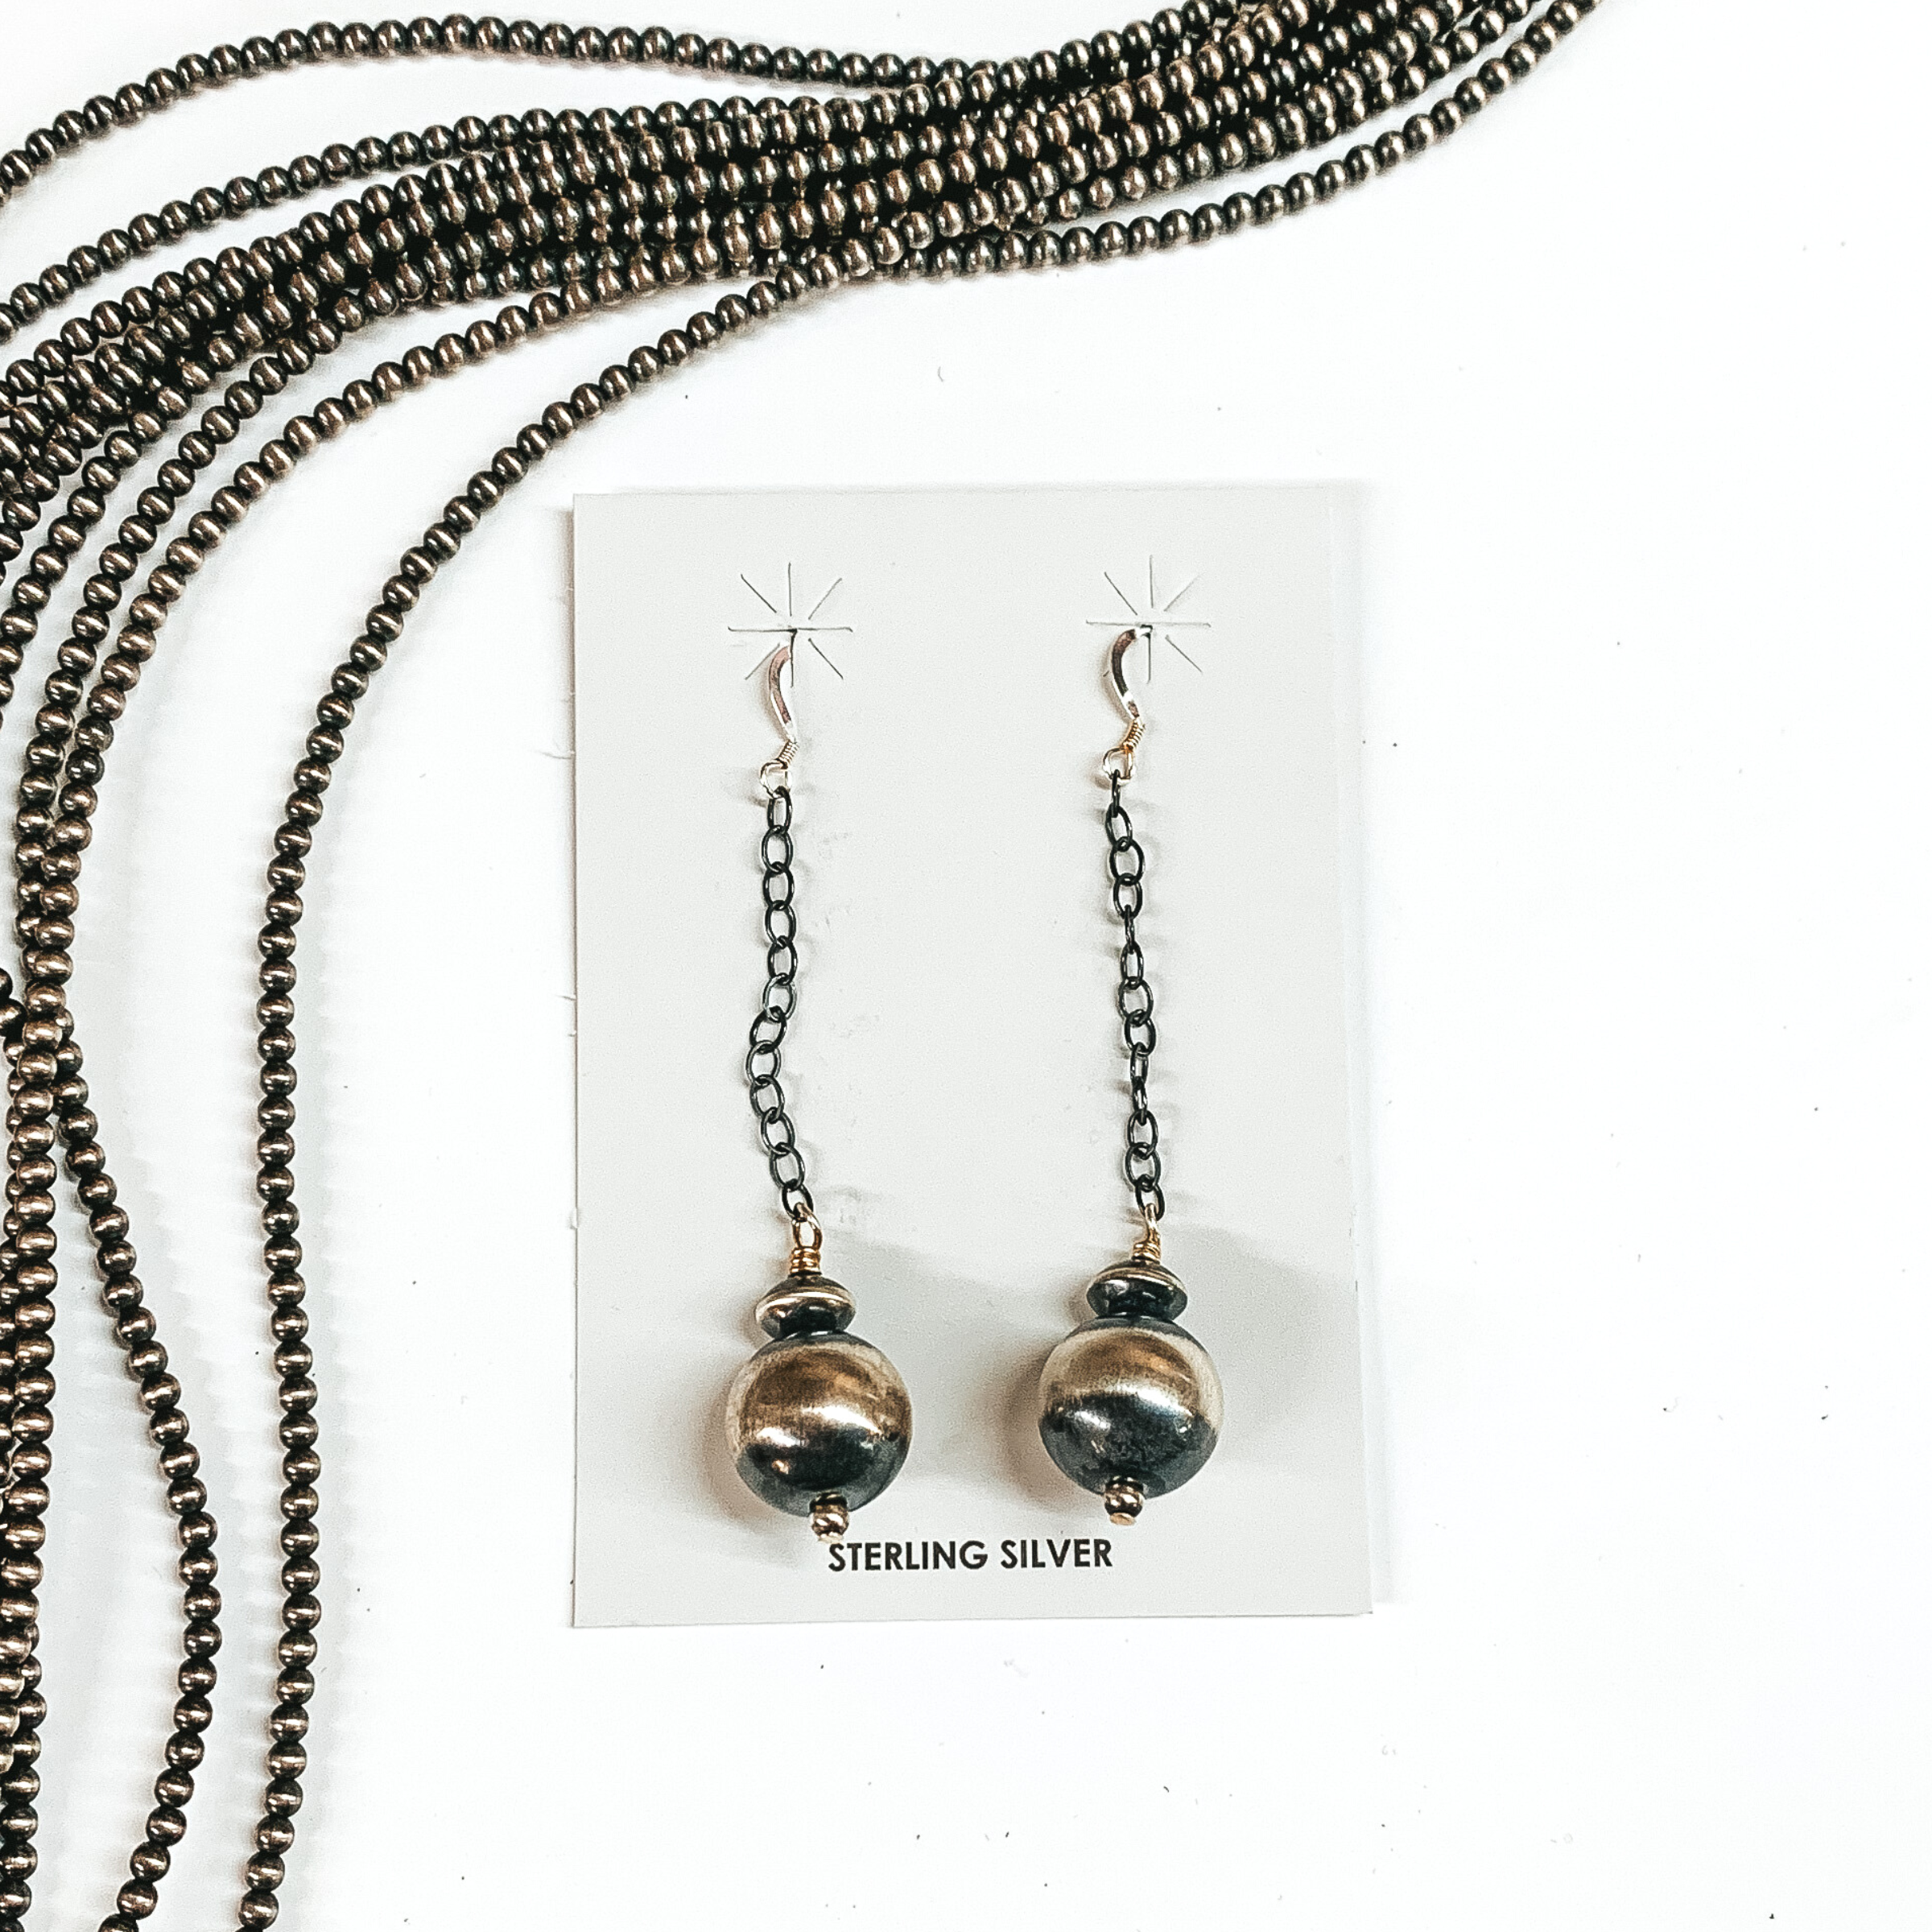 Mason Lee | Navajo Handmade Sterling Silver Navajo Pearl Drop Earrings - Giddy Up Glamour Boutique